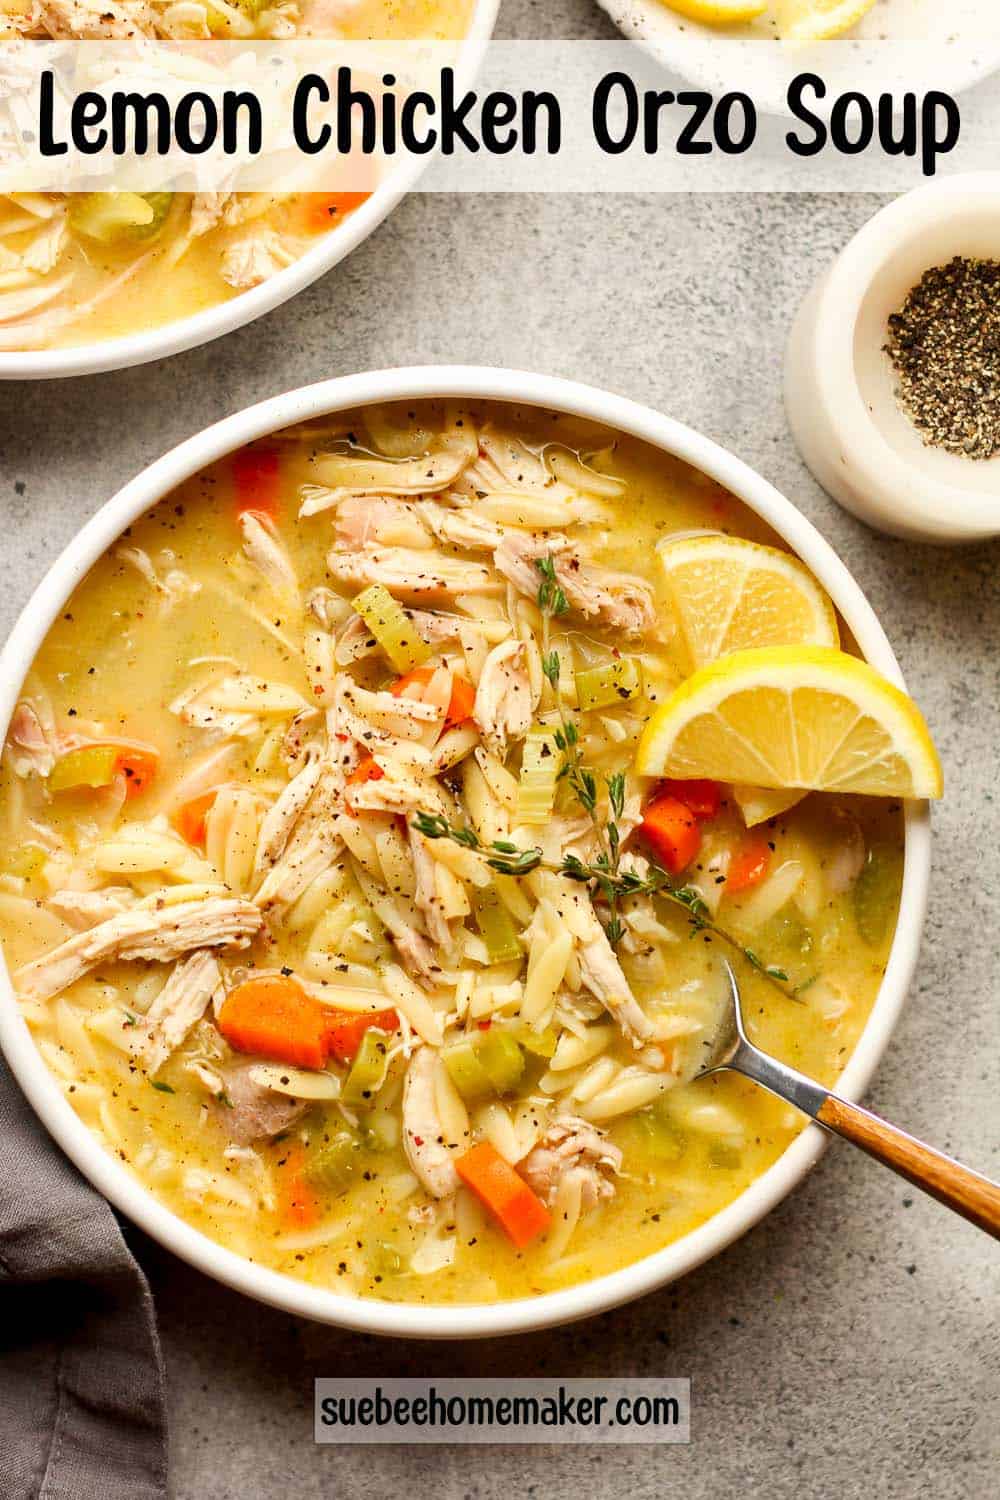 Overhead shot of a bowl of lemon chicken orzo soup with lemon slices.